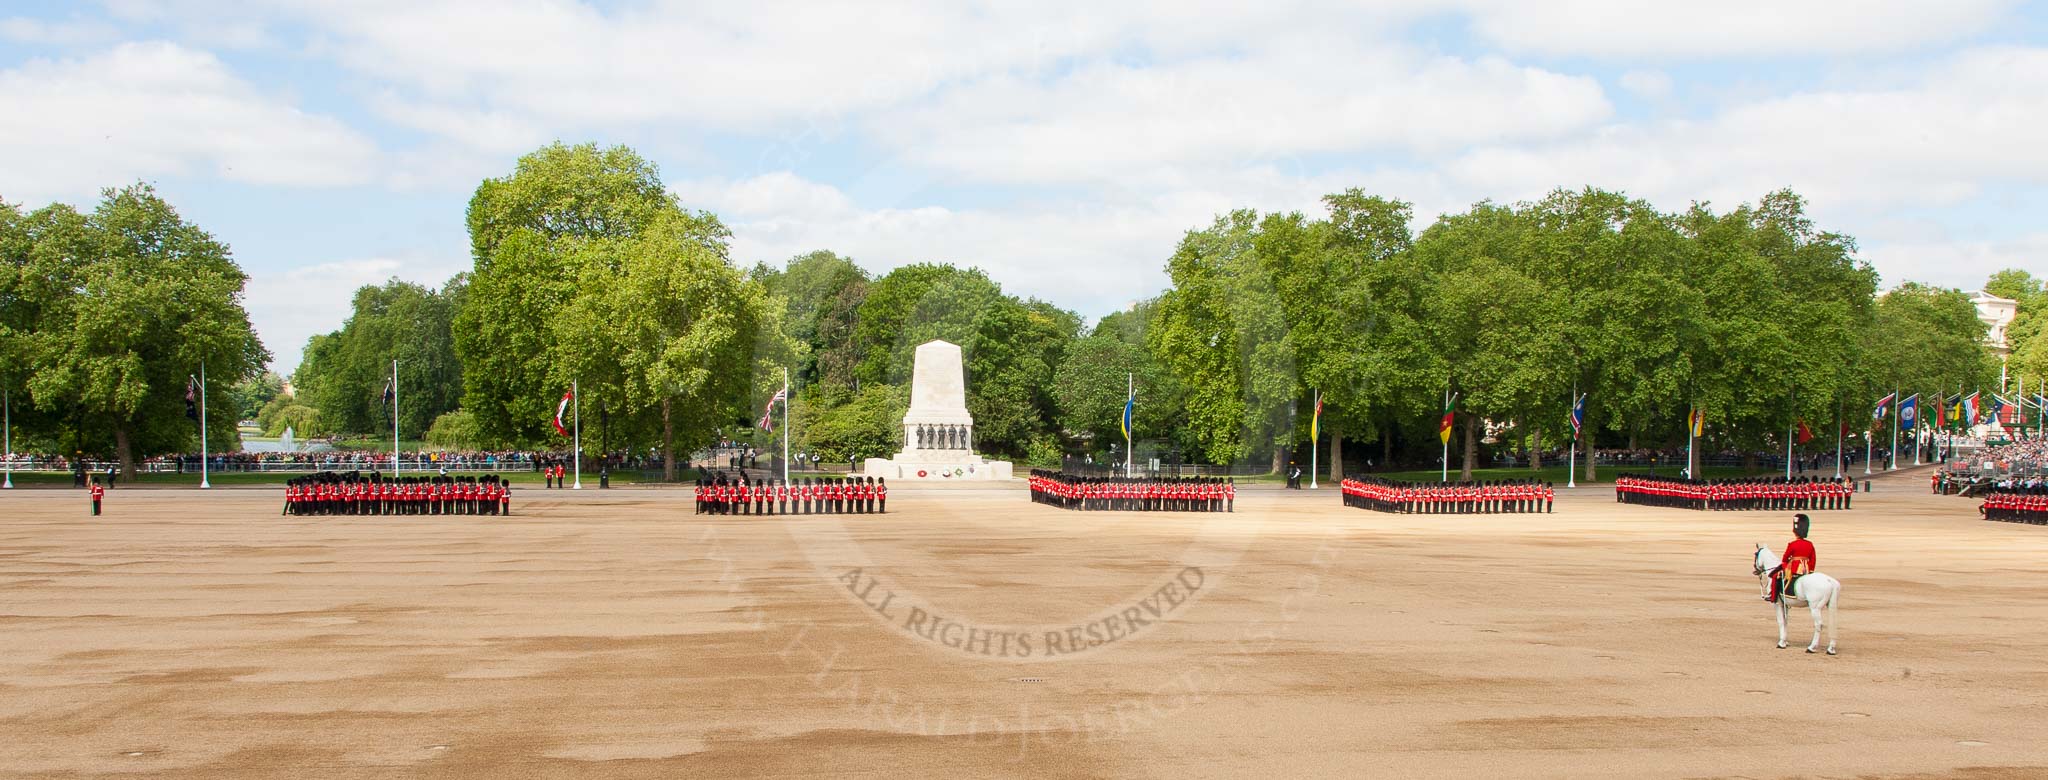 The Colonel's Review 2013: A wide angle overview of Horse Guards Parade - from left to right, No. 1 to No. 4 Guard. Behind No. 1 Guard St. James's Park Lake, behind No. 3 Guard the Guards Memorial..
Horse Guards Parade, Westminster,
London SW1,

United Kingdom,
on 08 June 2013 at 10:36, image #166